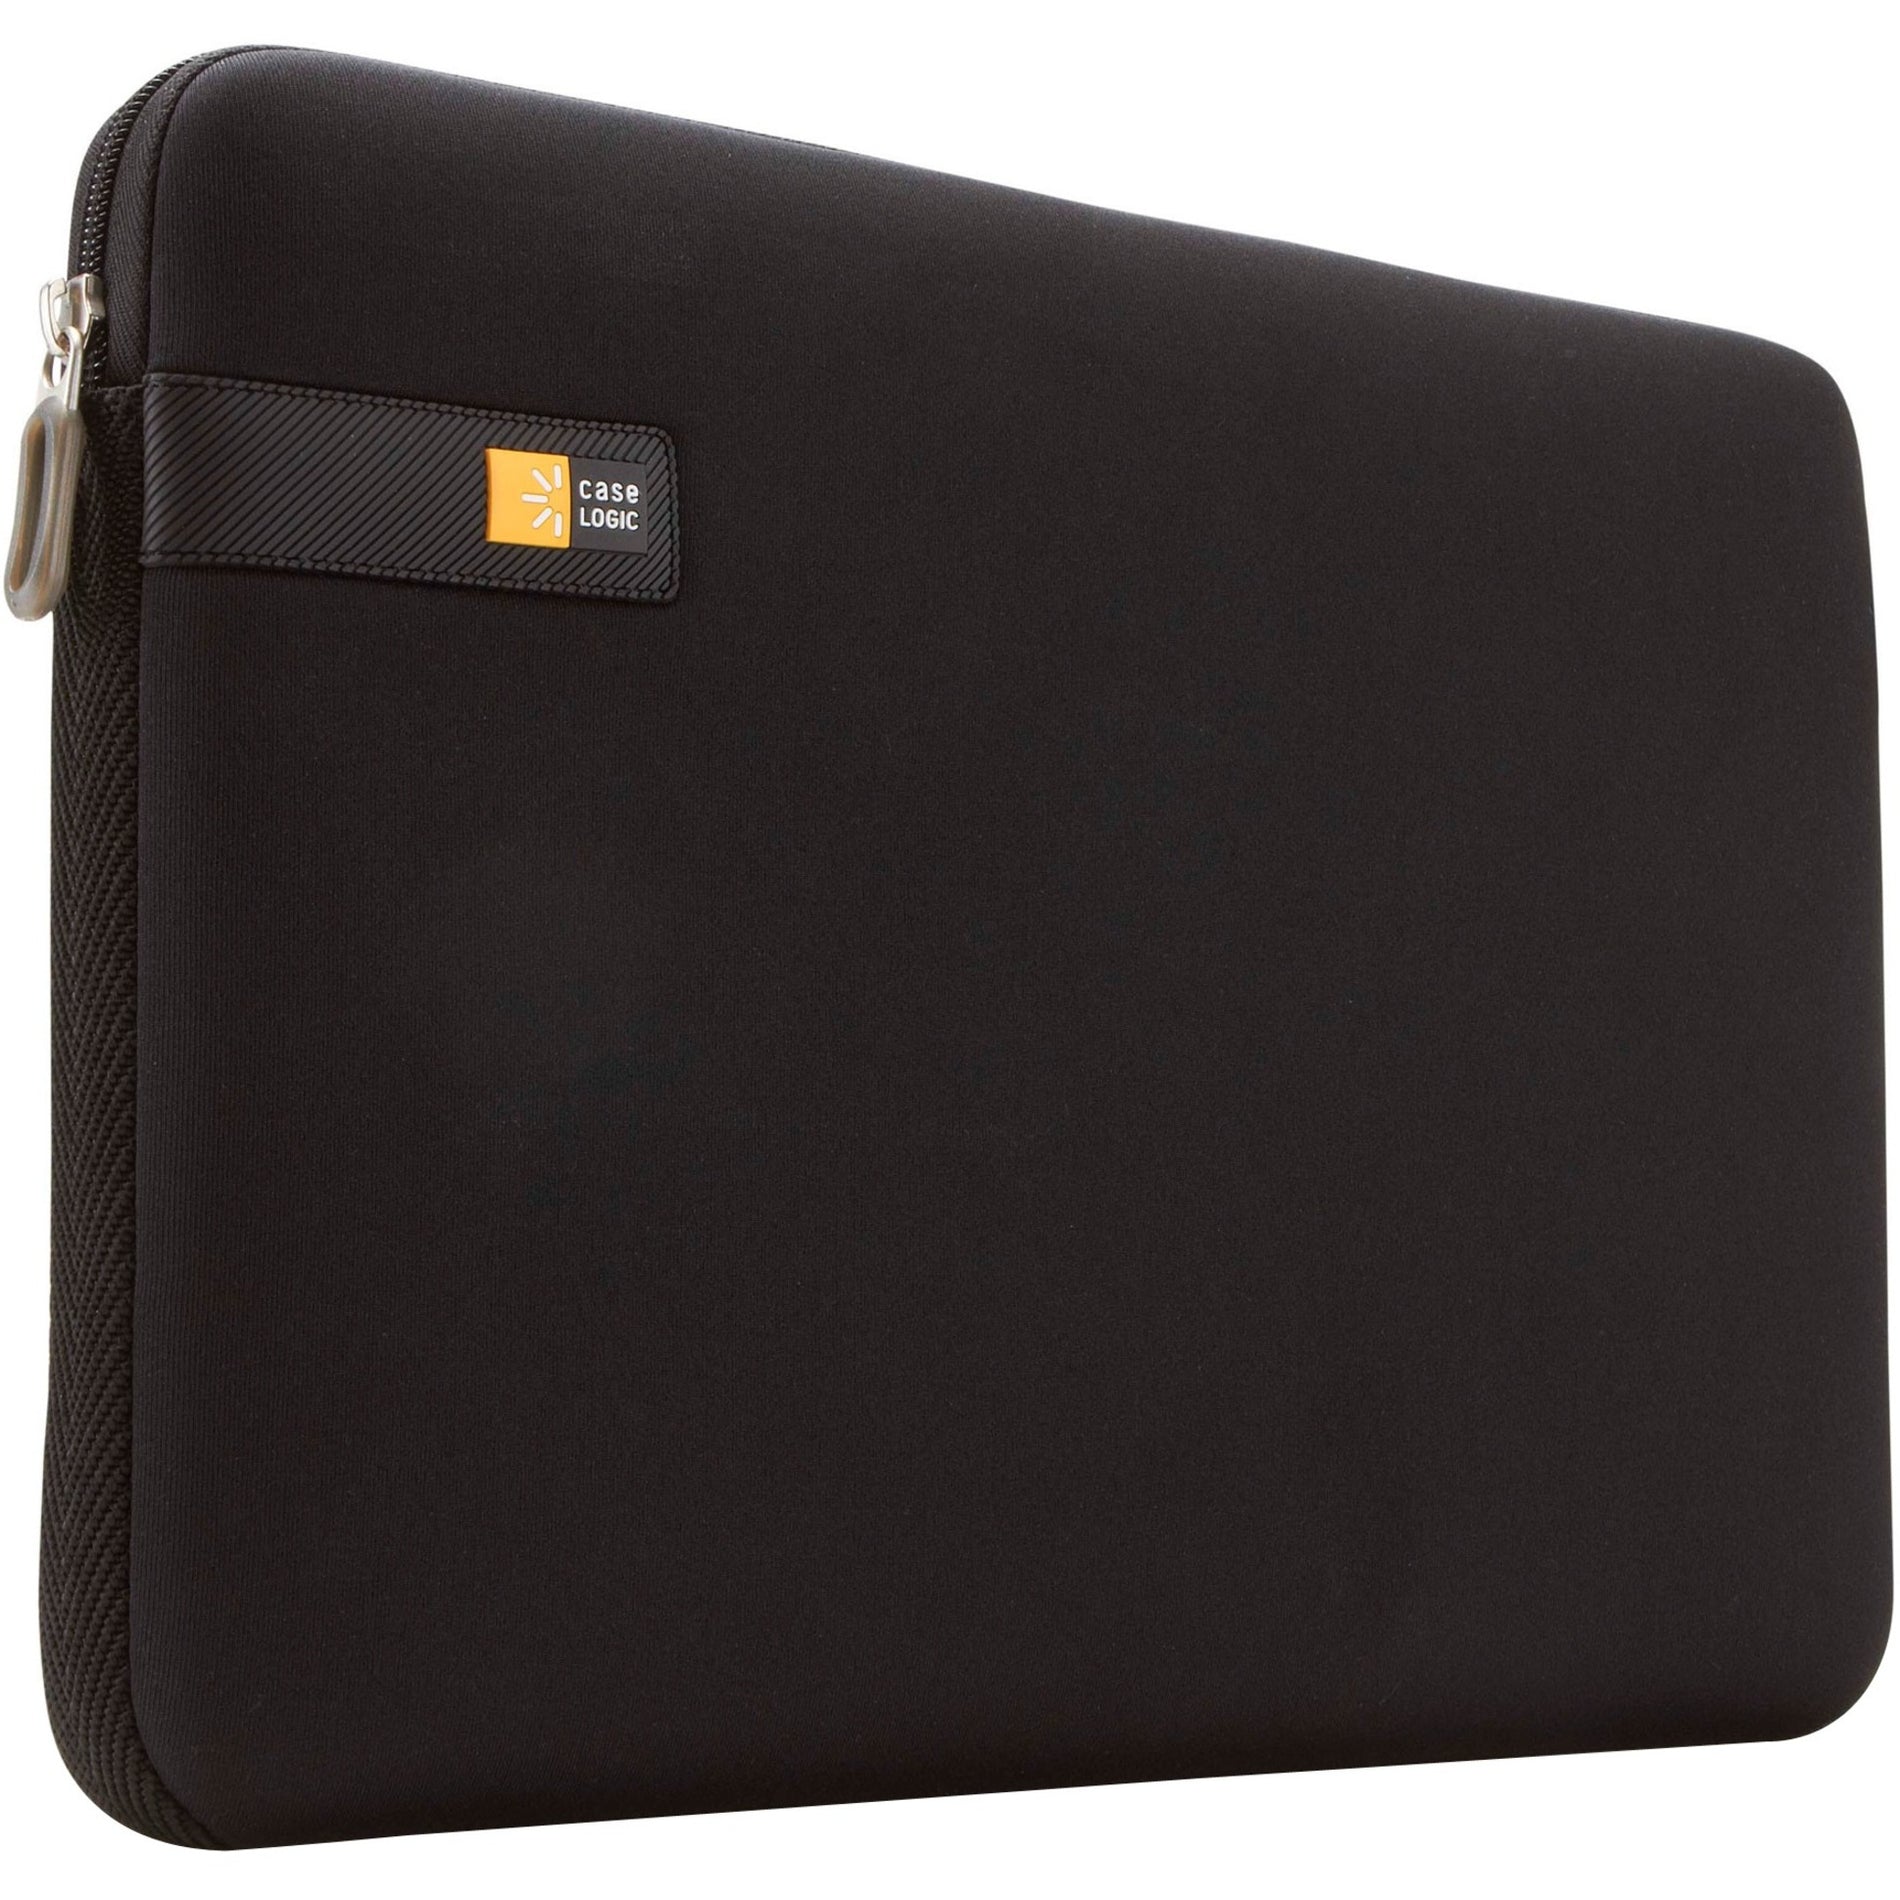 Case Logic 3201354 14" Laptop Sleeve Sleek and Protective Black Carrying Case [Discontinued]